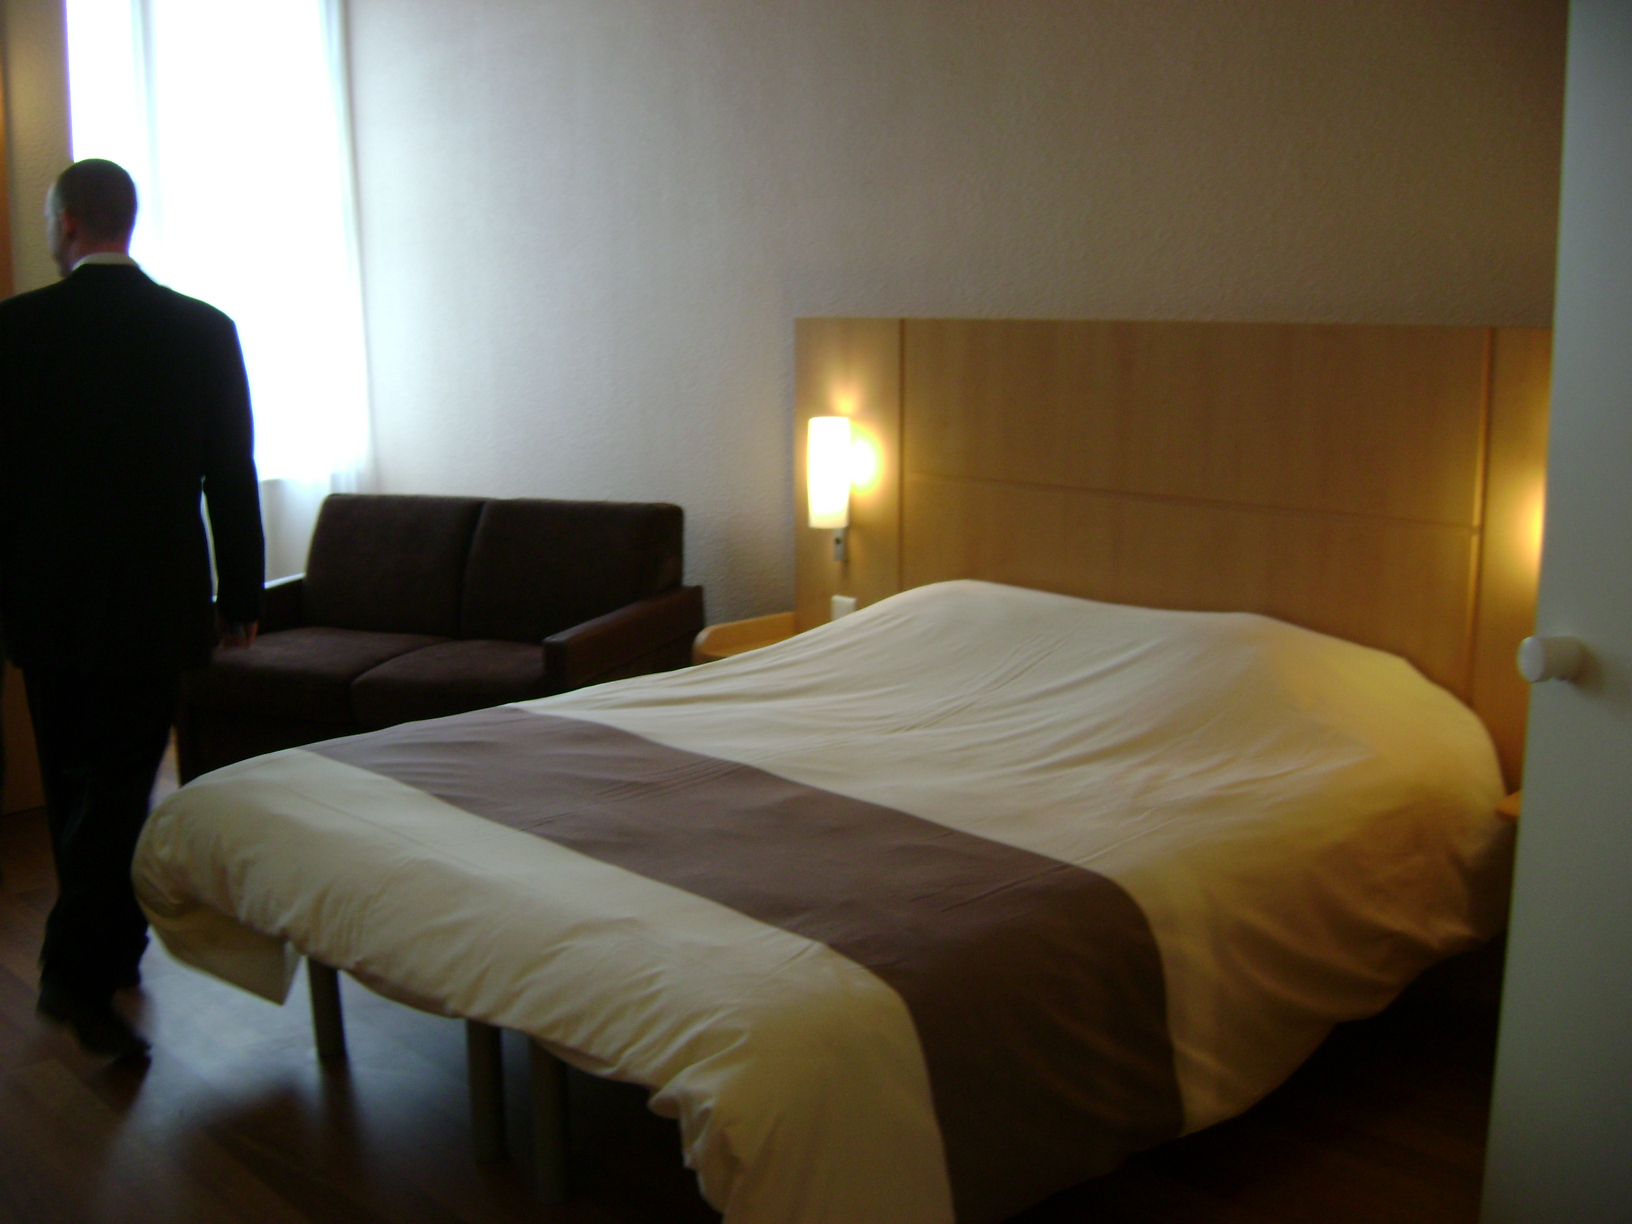 a man standing next to a bed looking at another